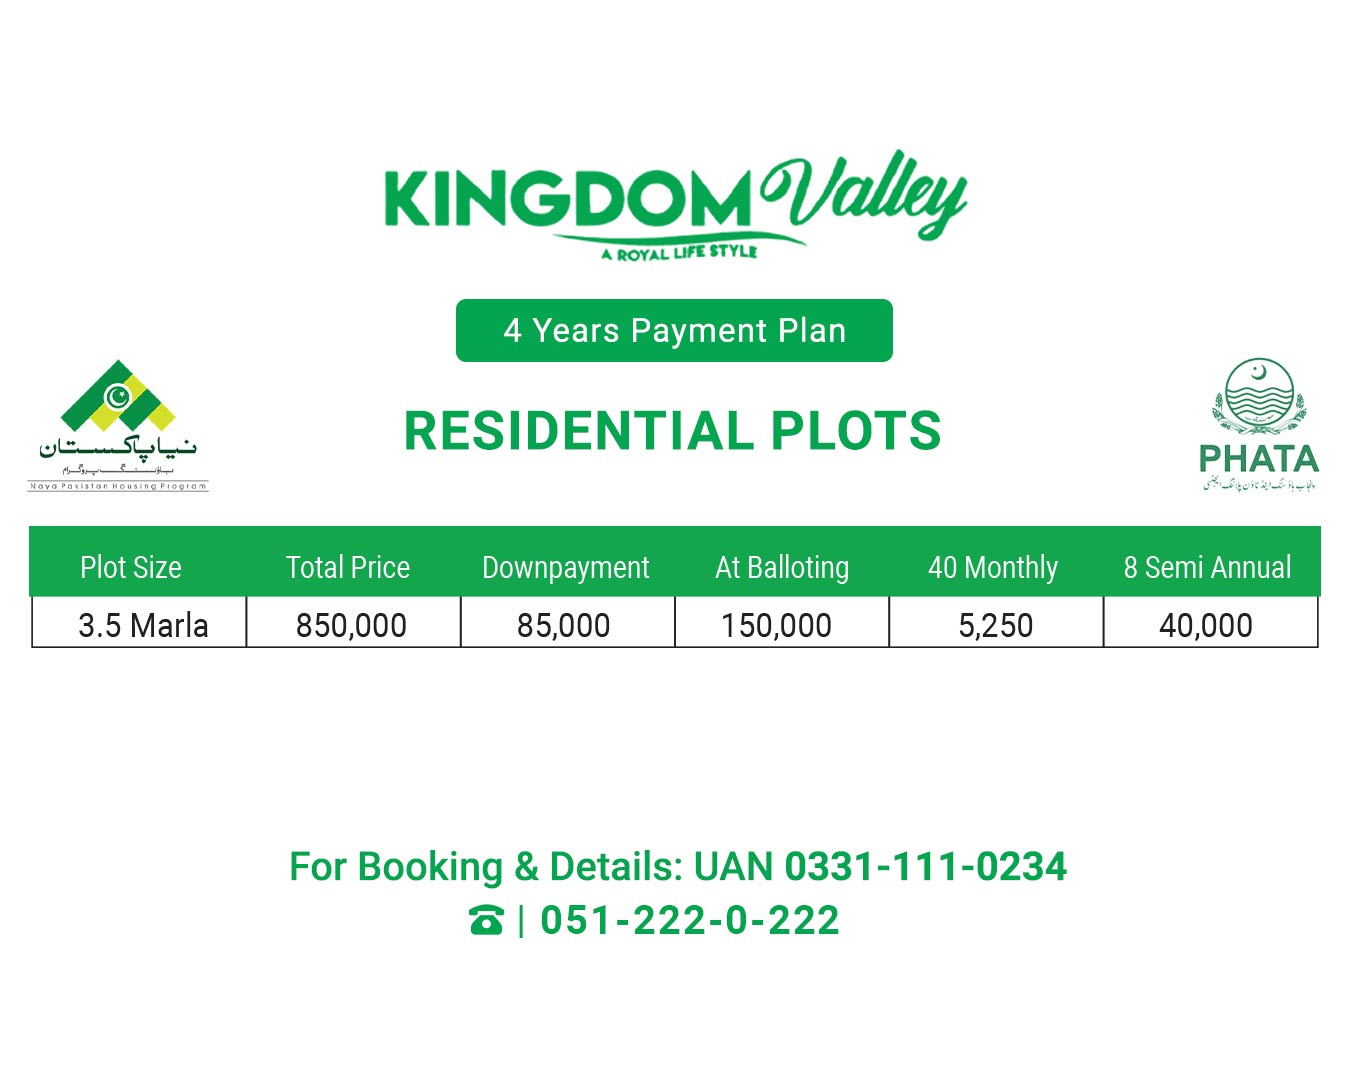 Kingdom Valley New 3.5 Marla payment plan